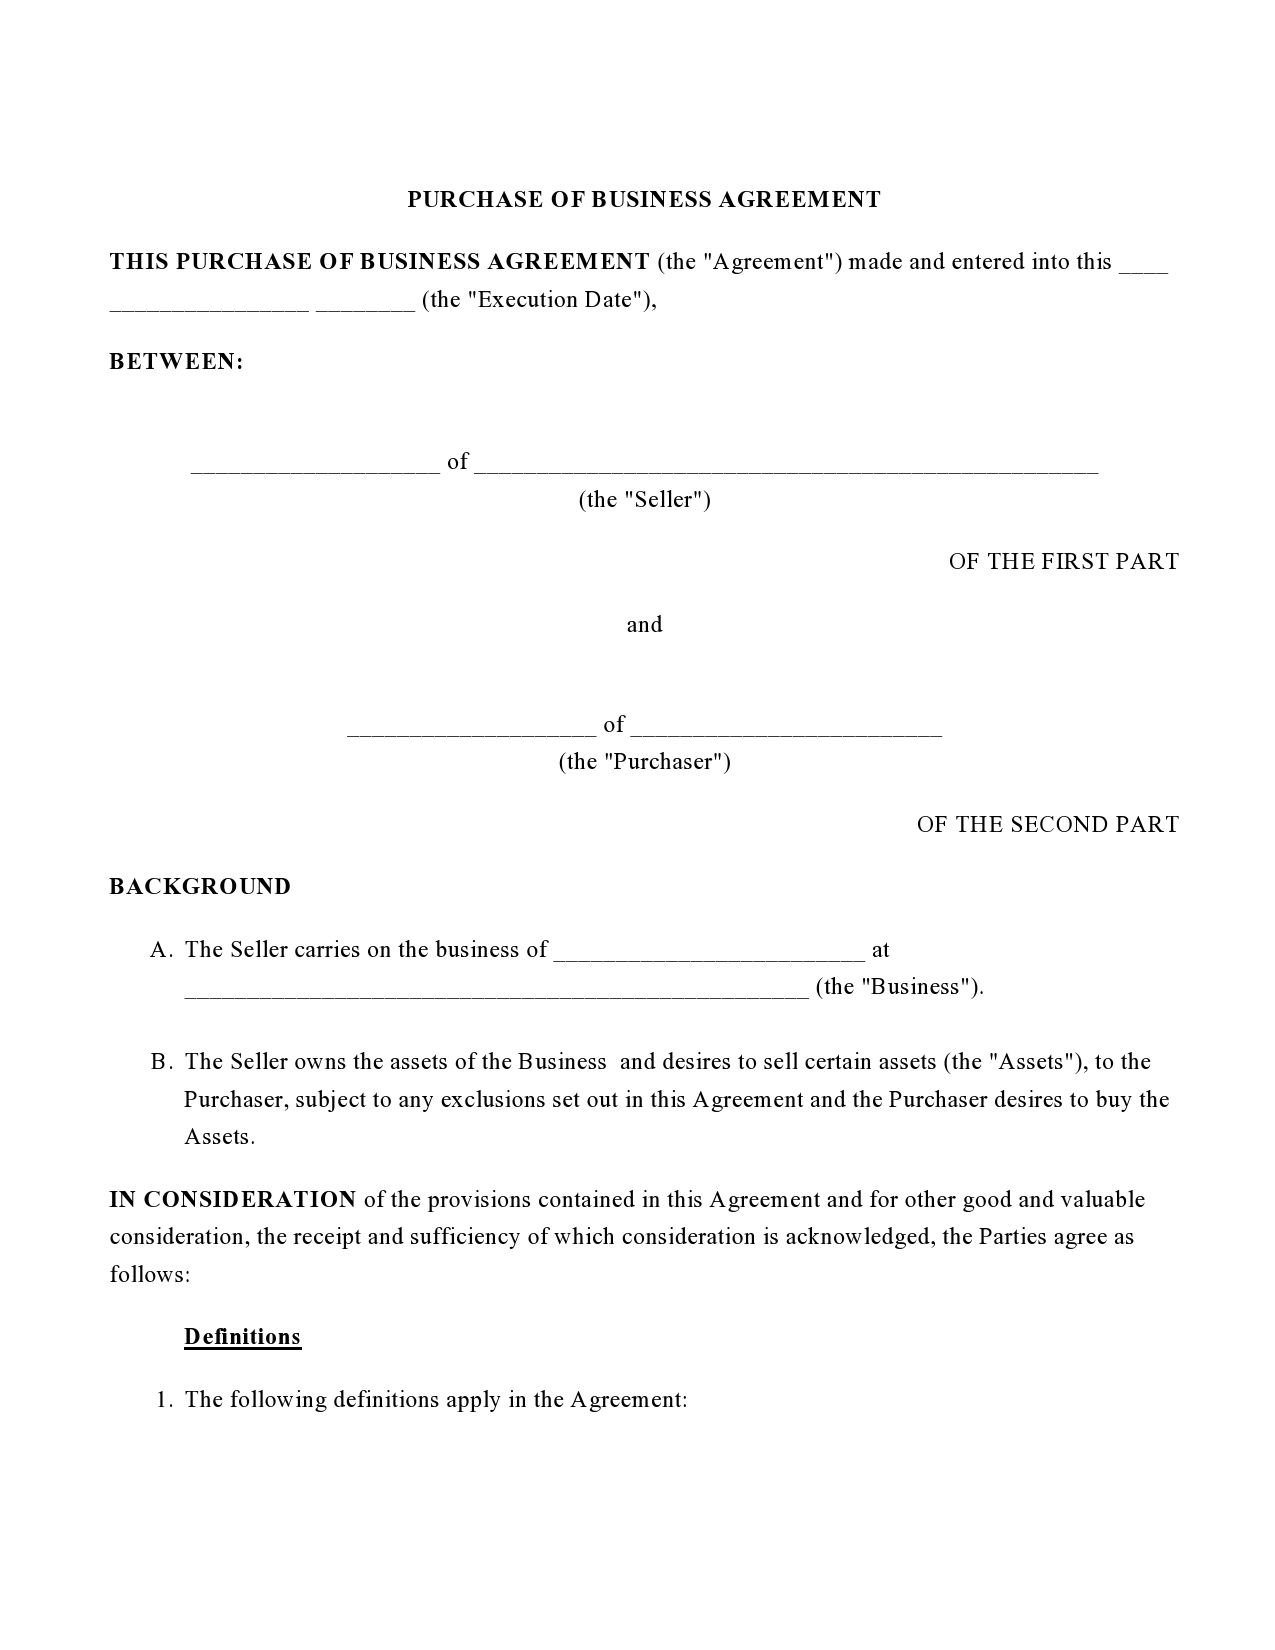 Free business purchase agreement 07